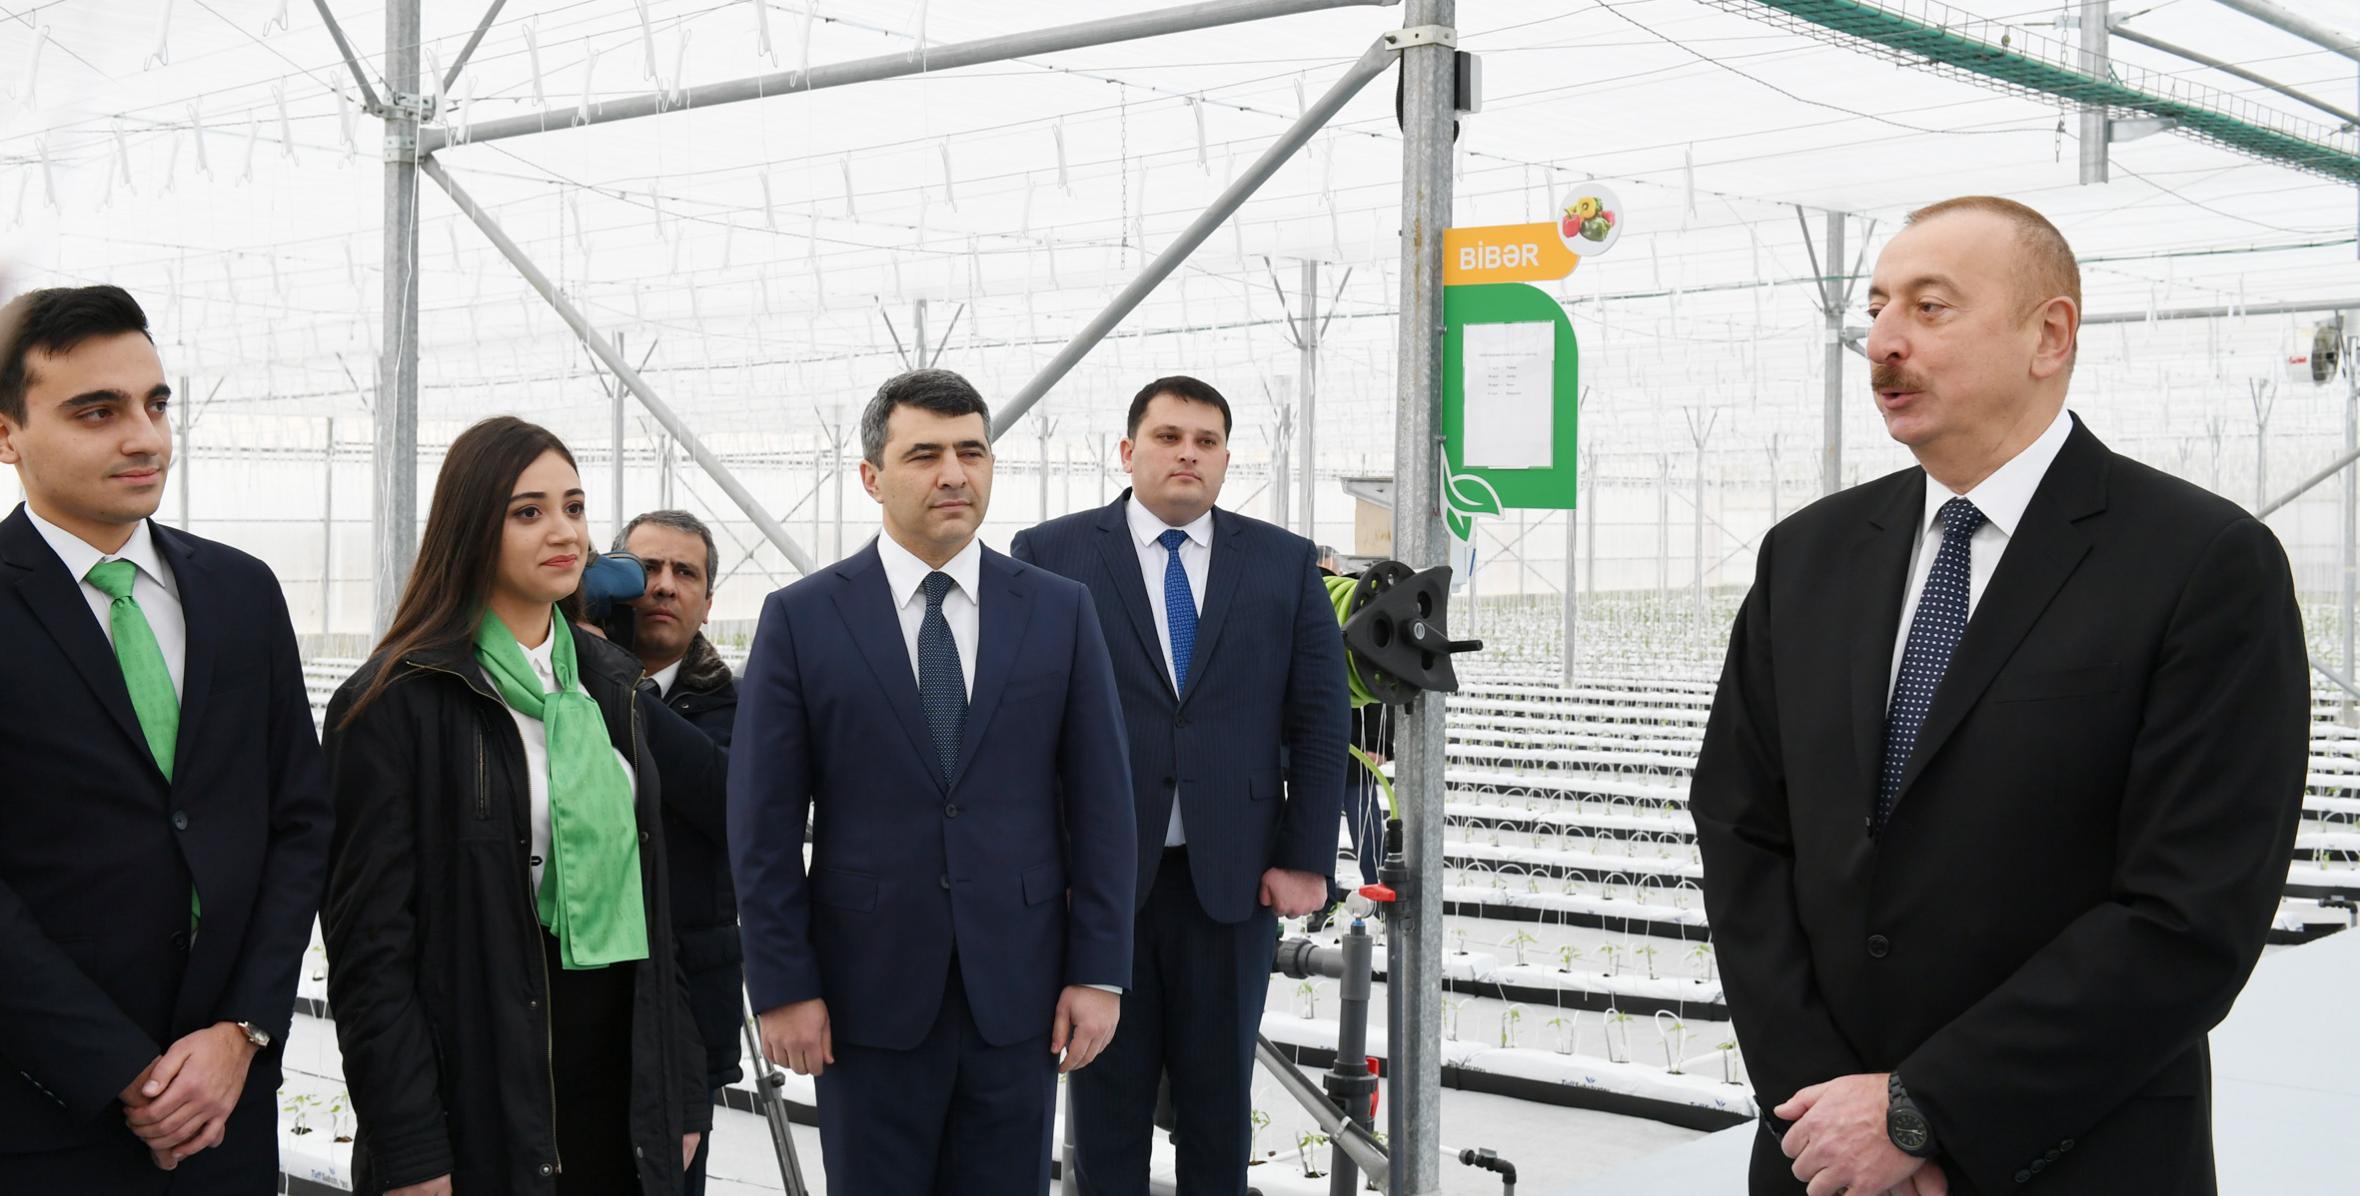 Speech by Ilham Aliyev at the opening of Research Institute of Vegetable Growing